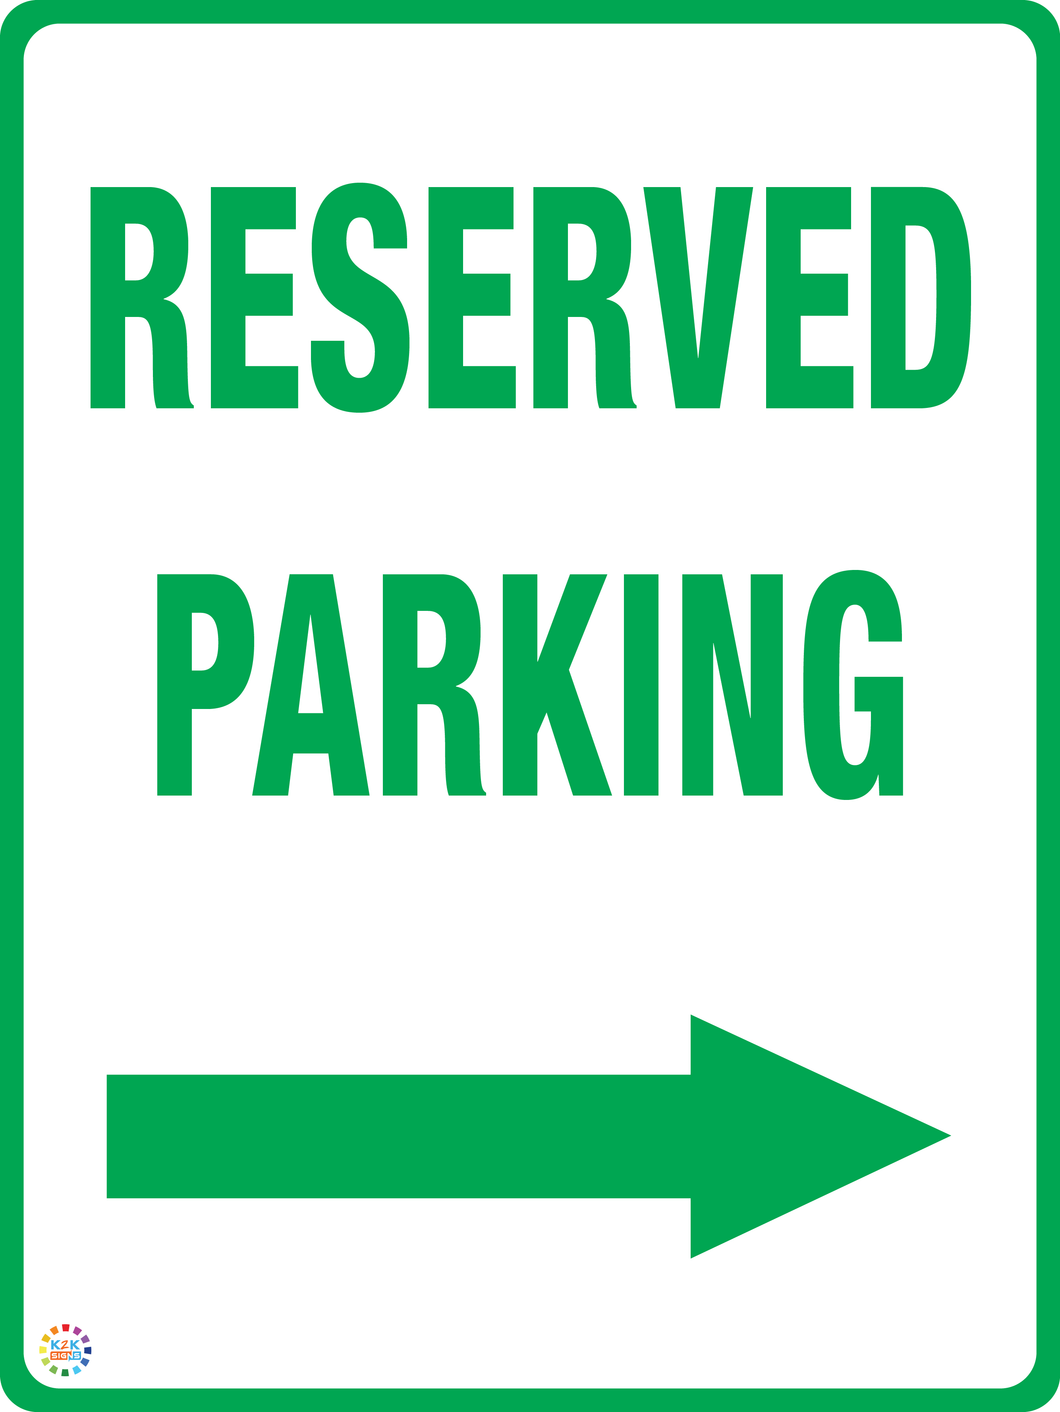 Reserved Parking (Right Arrow) Sign